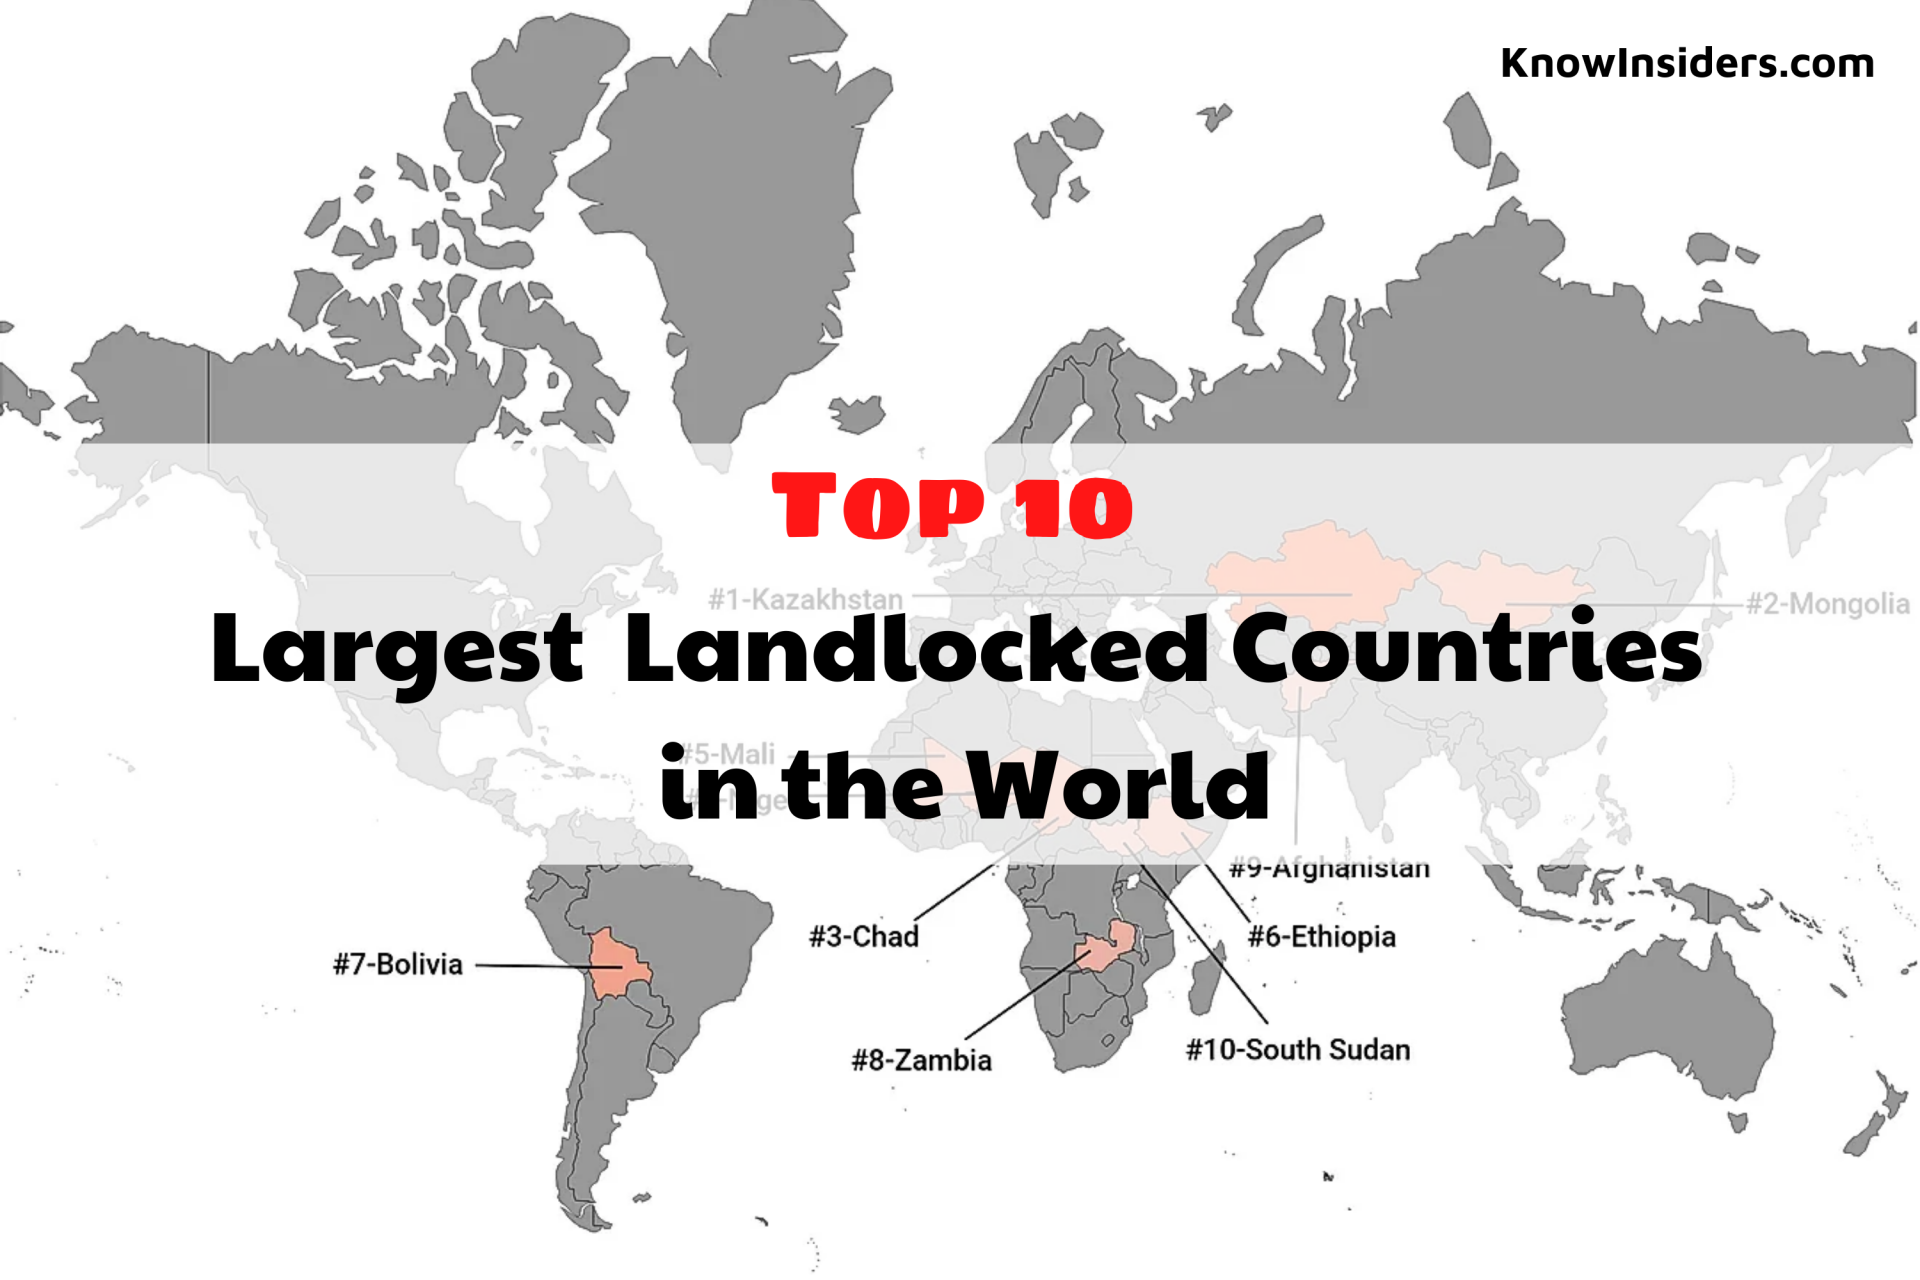 Top 10 Largest Landlocked Countries In The World by Land Area/Population